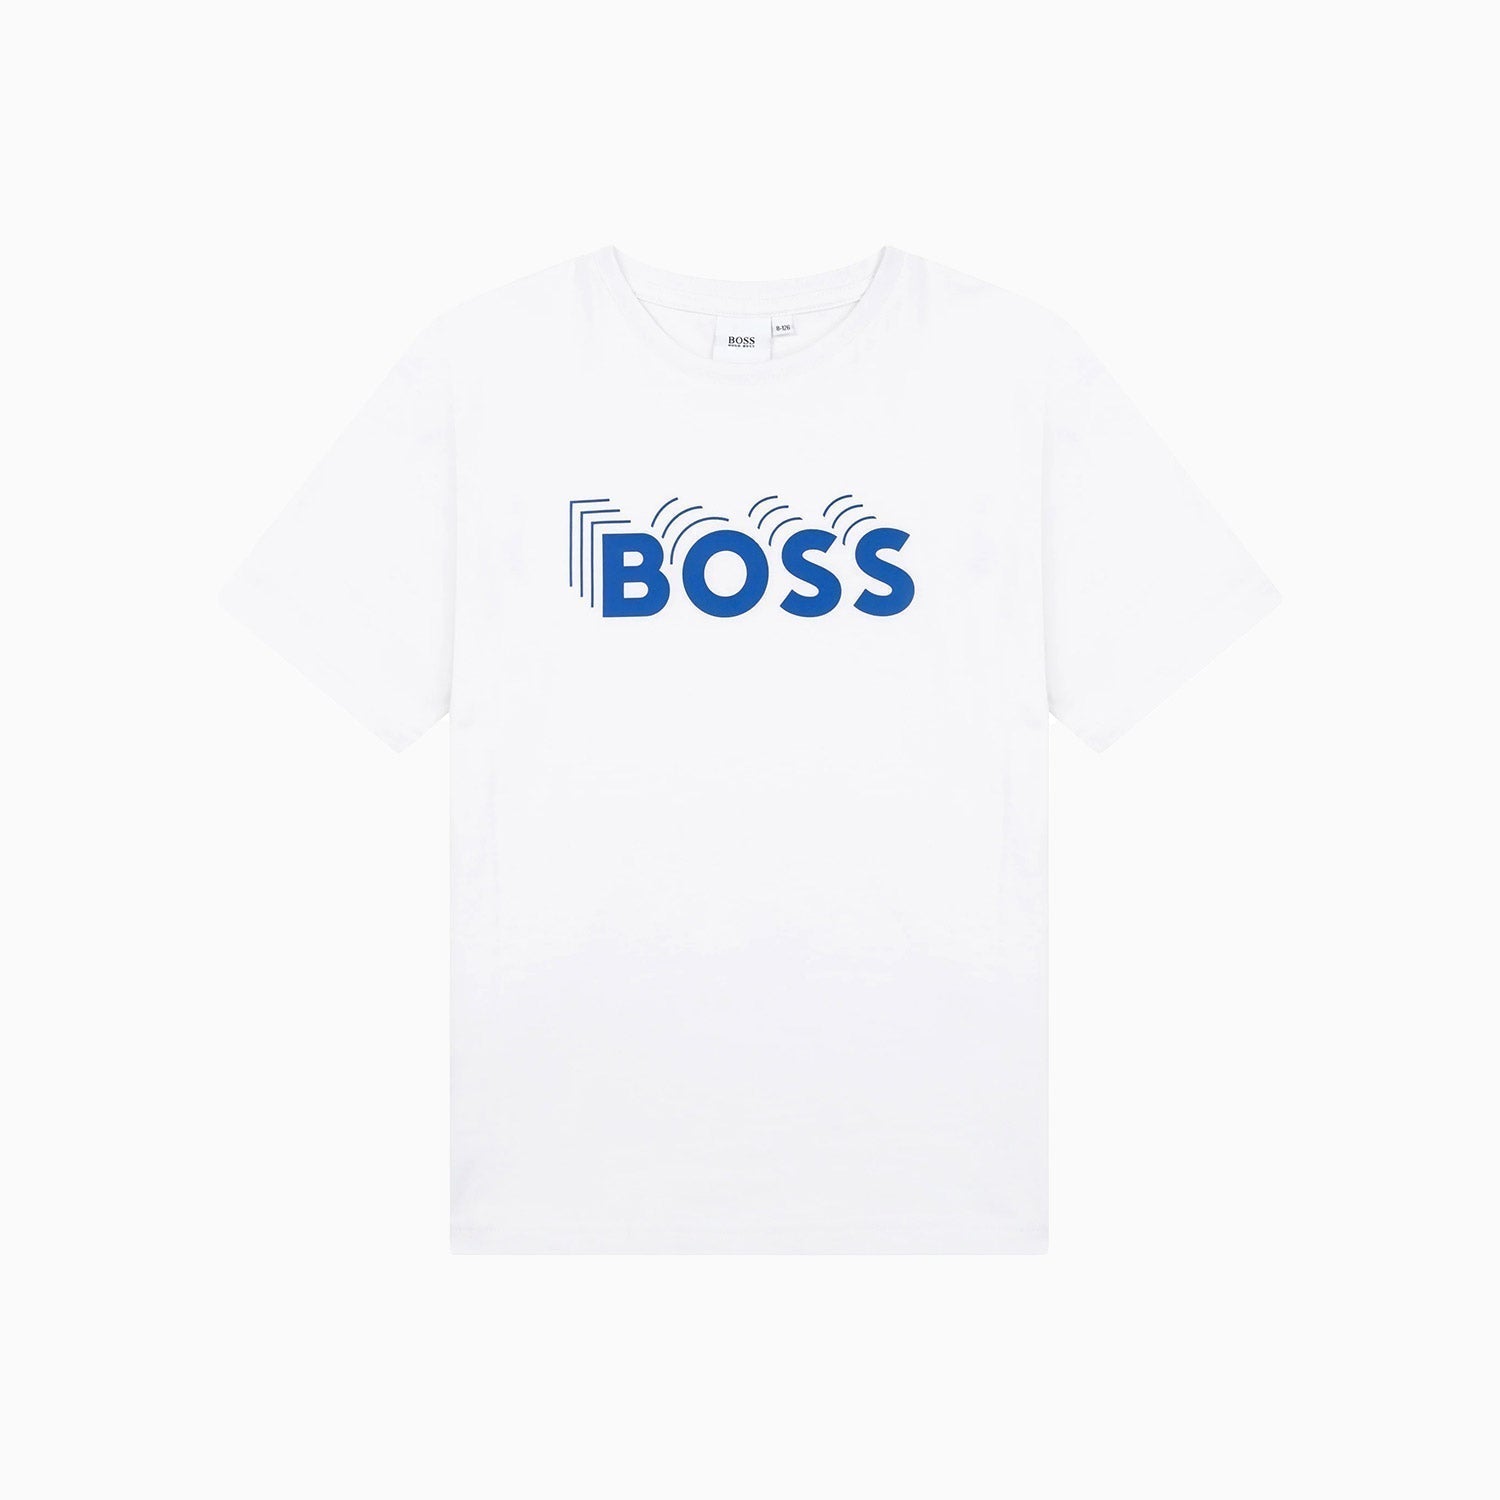 Hugo Boss Kid's T Shirt And Shorts Outfit - Color: Electric Blue - Kids Premium Clothing -